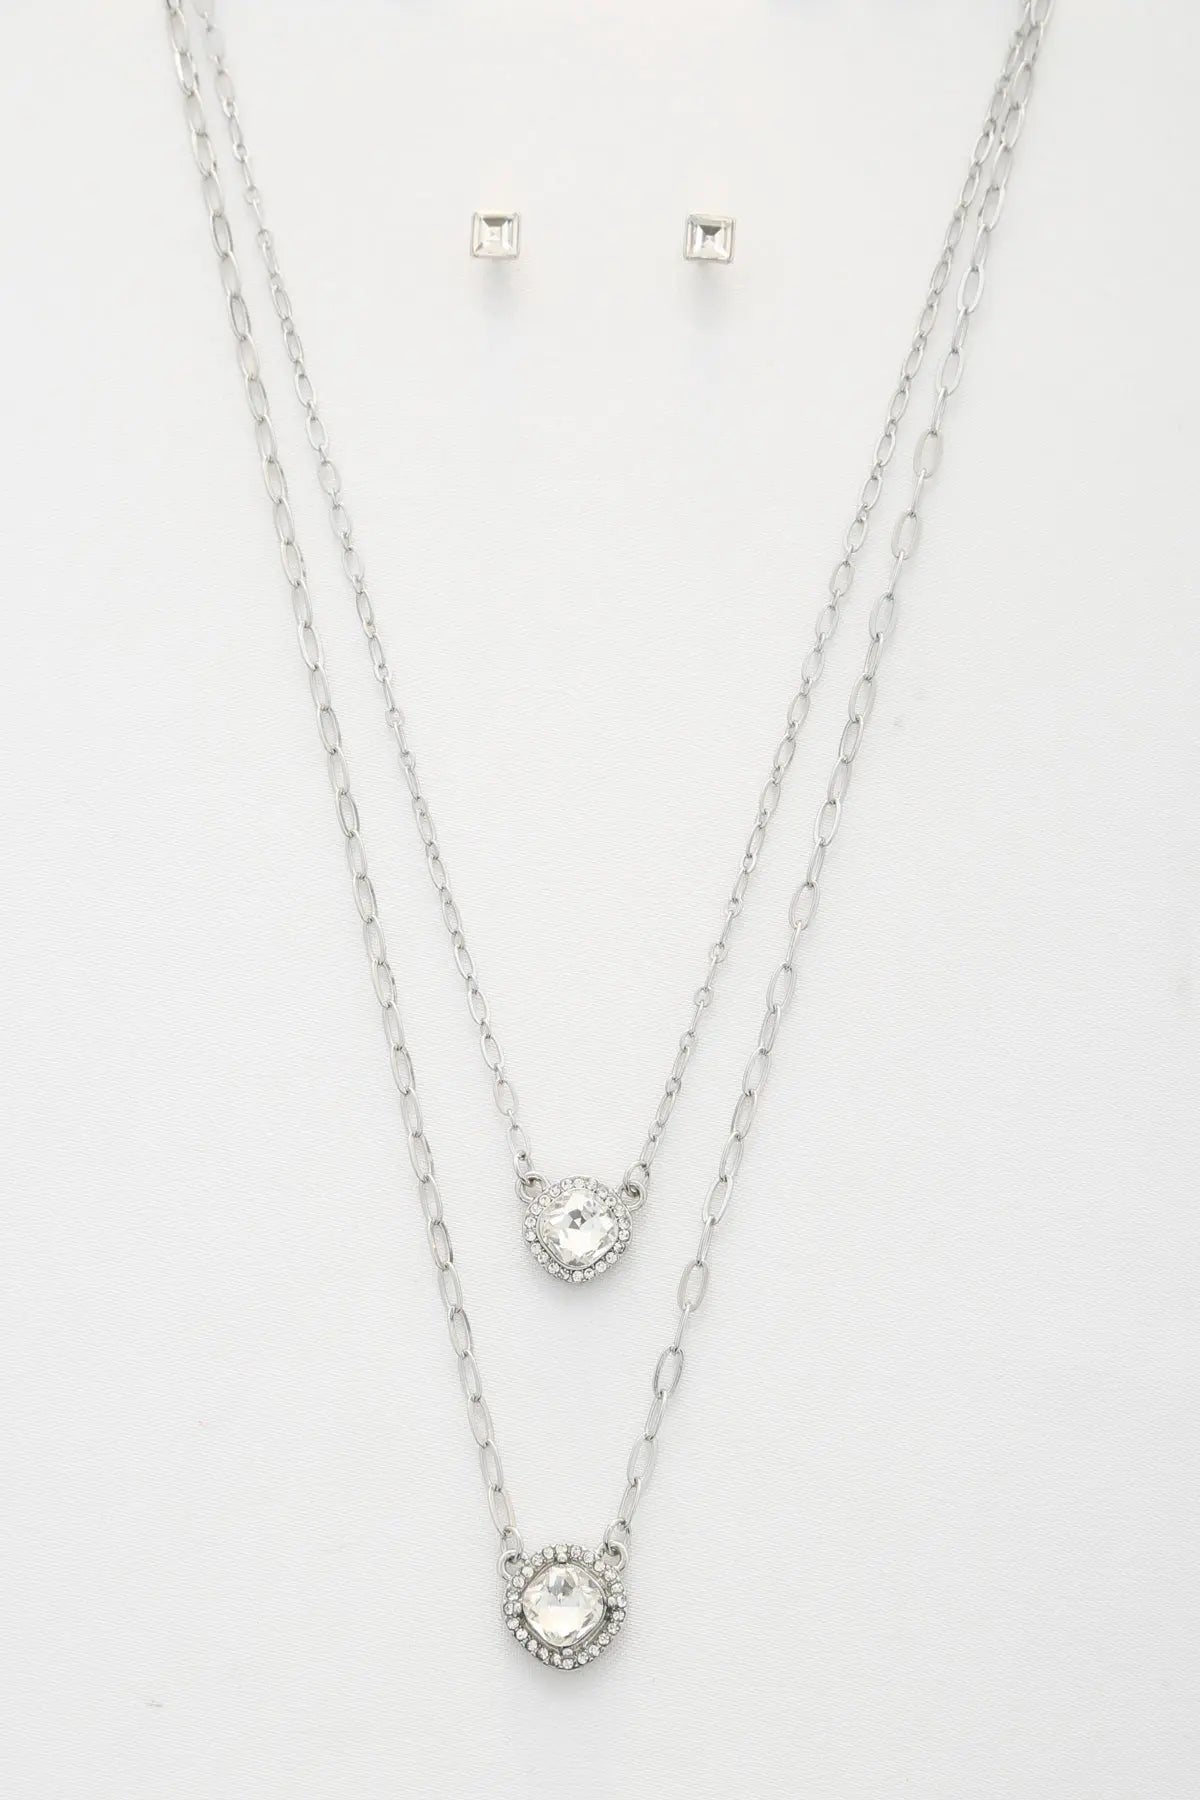 Double Crystal Metal Layered Necklace Sunny EvE Fashion